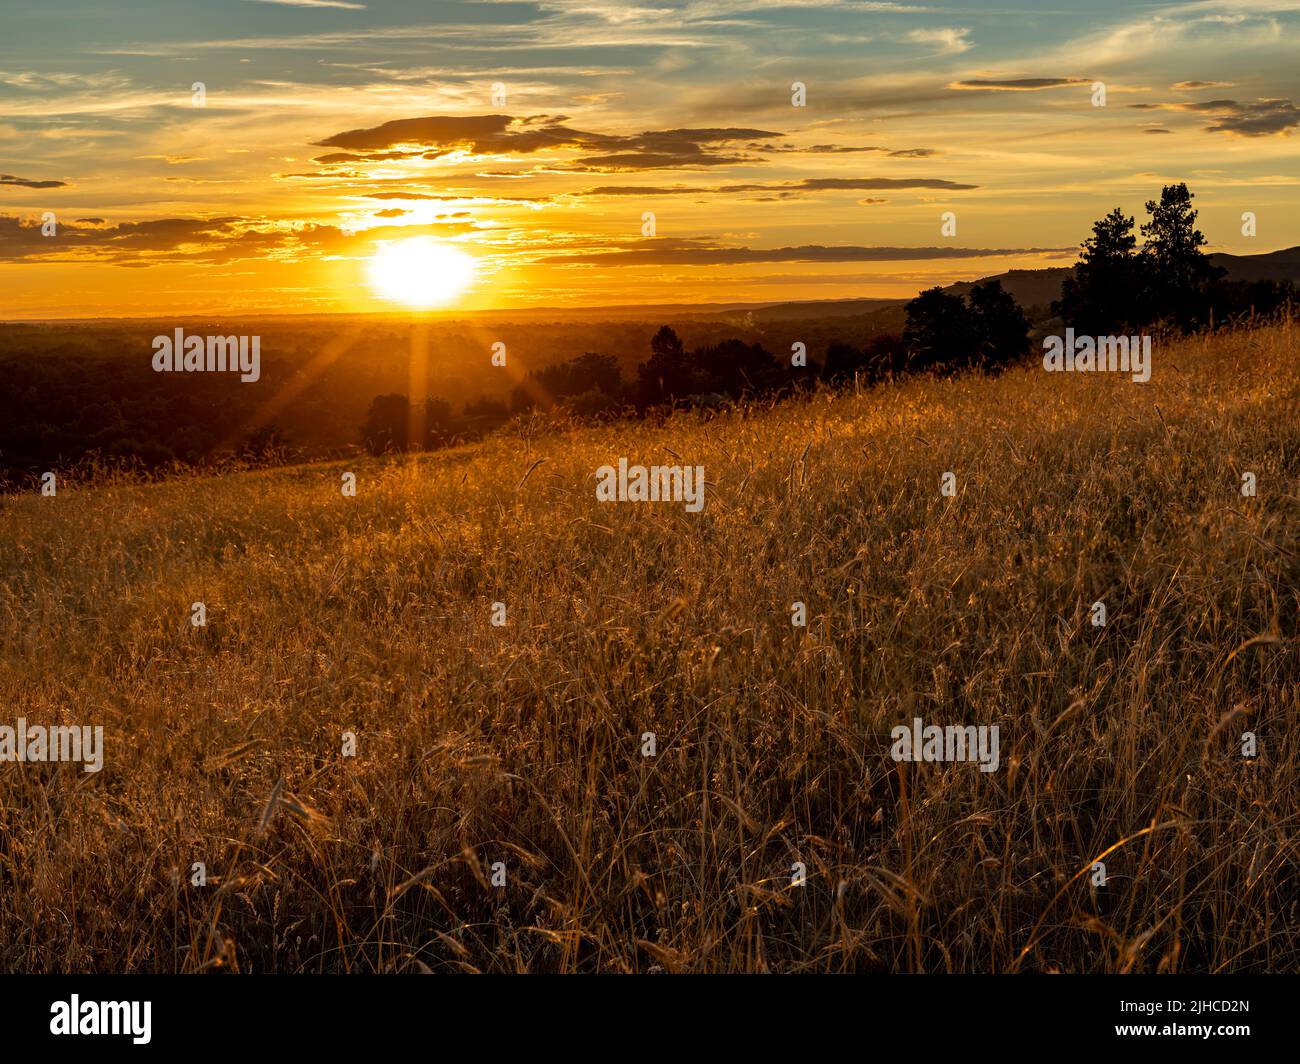 Summer sunset with clouds and grass covered hills Stock Photo